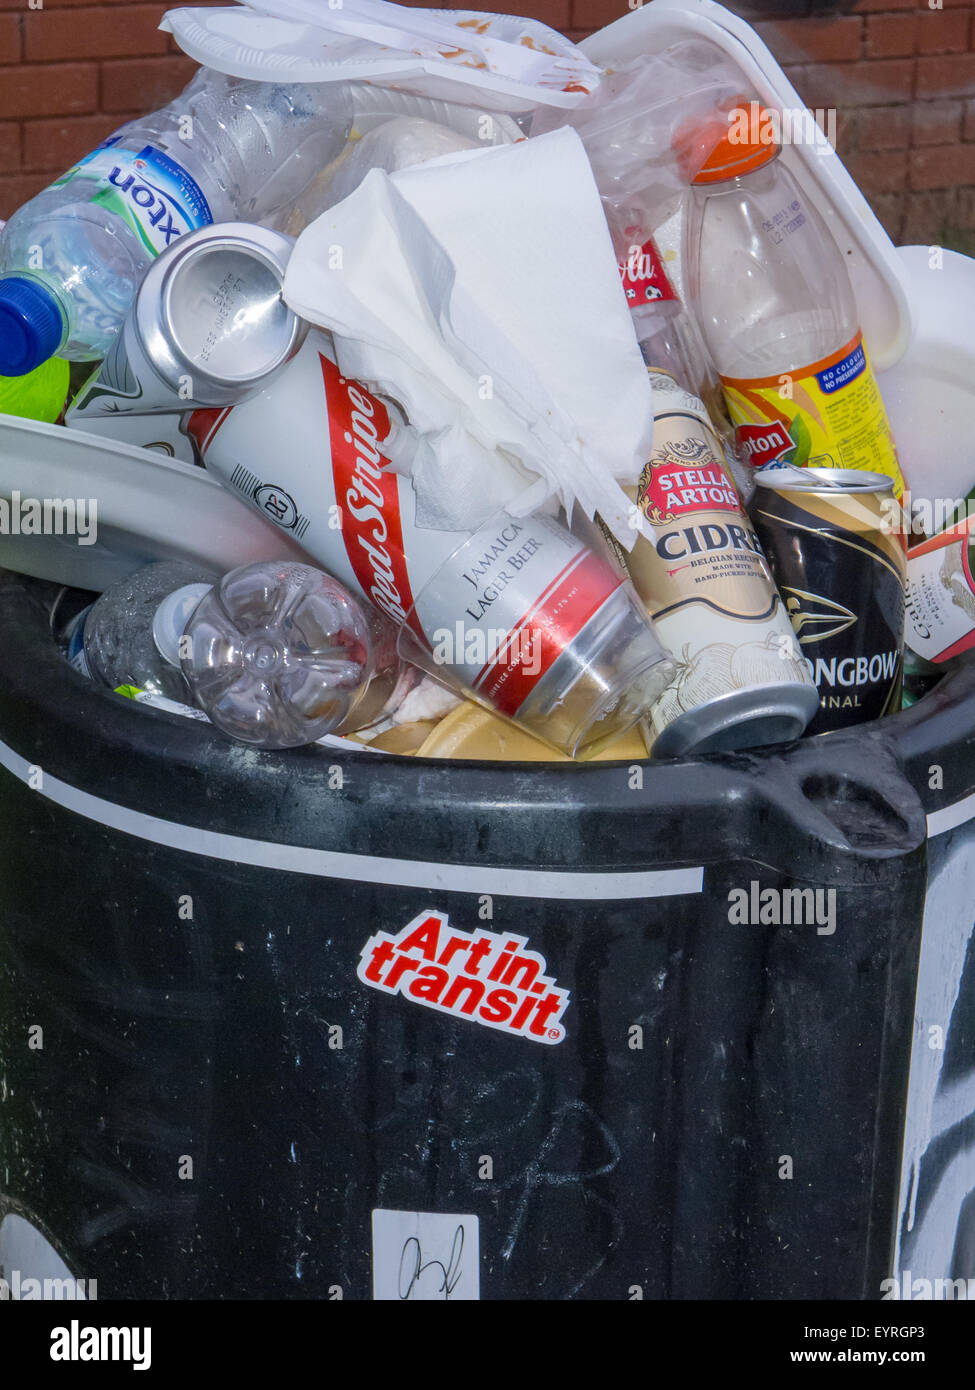 Notting Hill, London, England. Over flowing rubbish bin, with 'Art in Transit' sticker. Carnival. Stock Photo